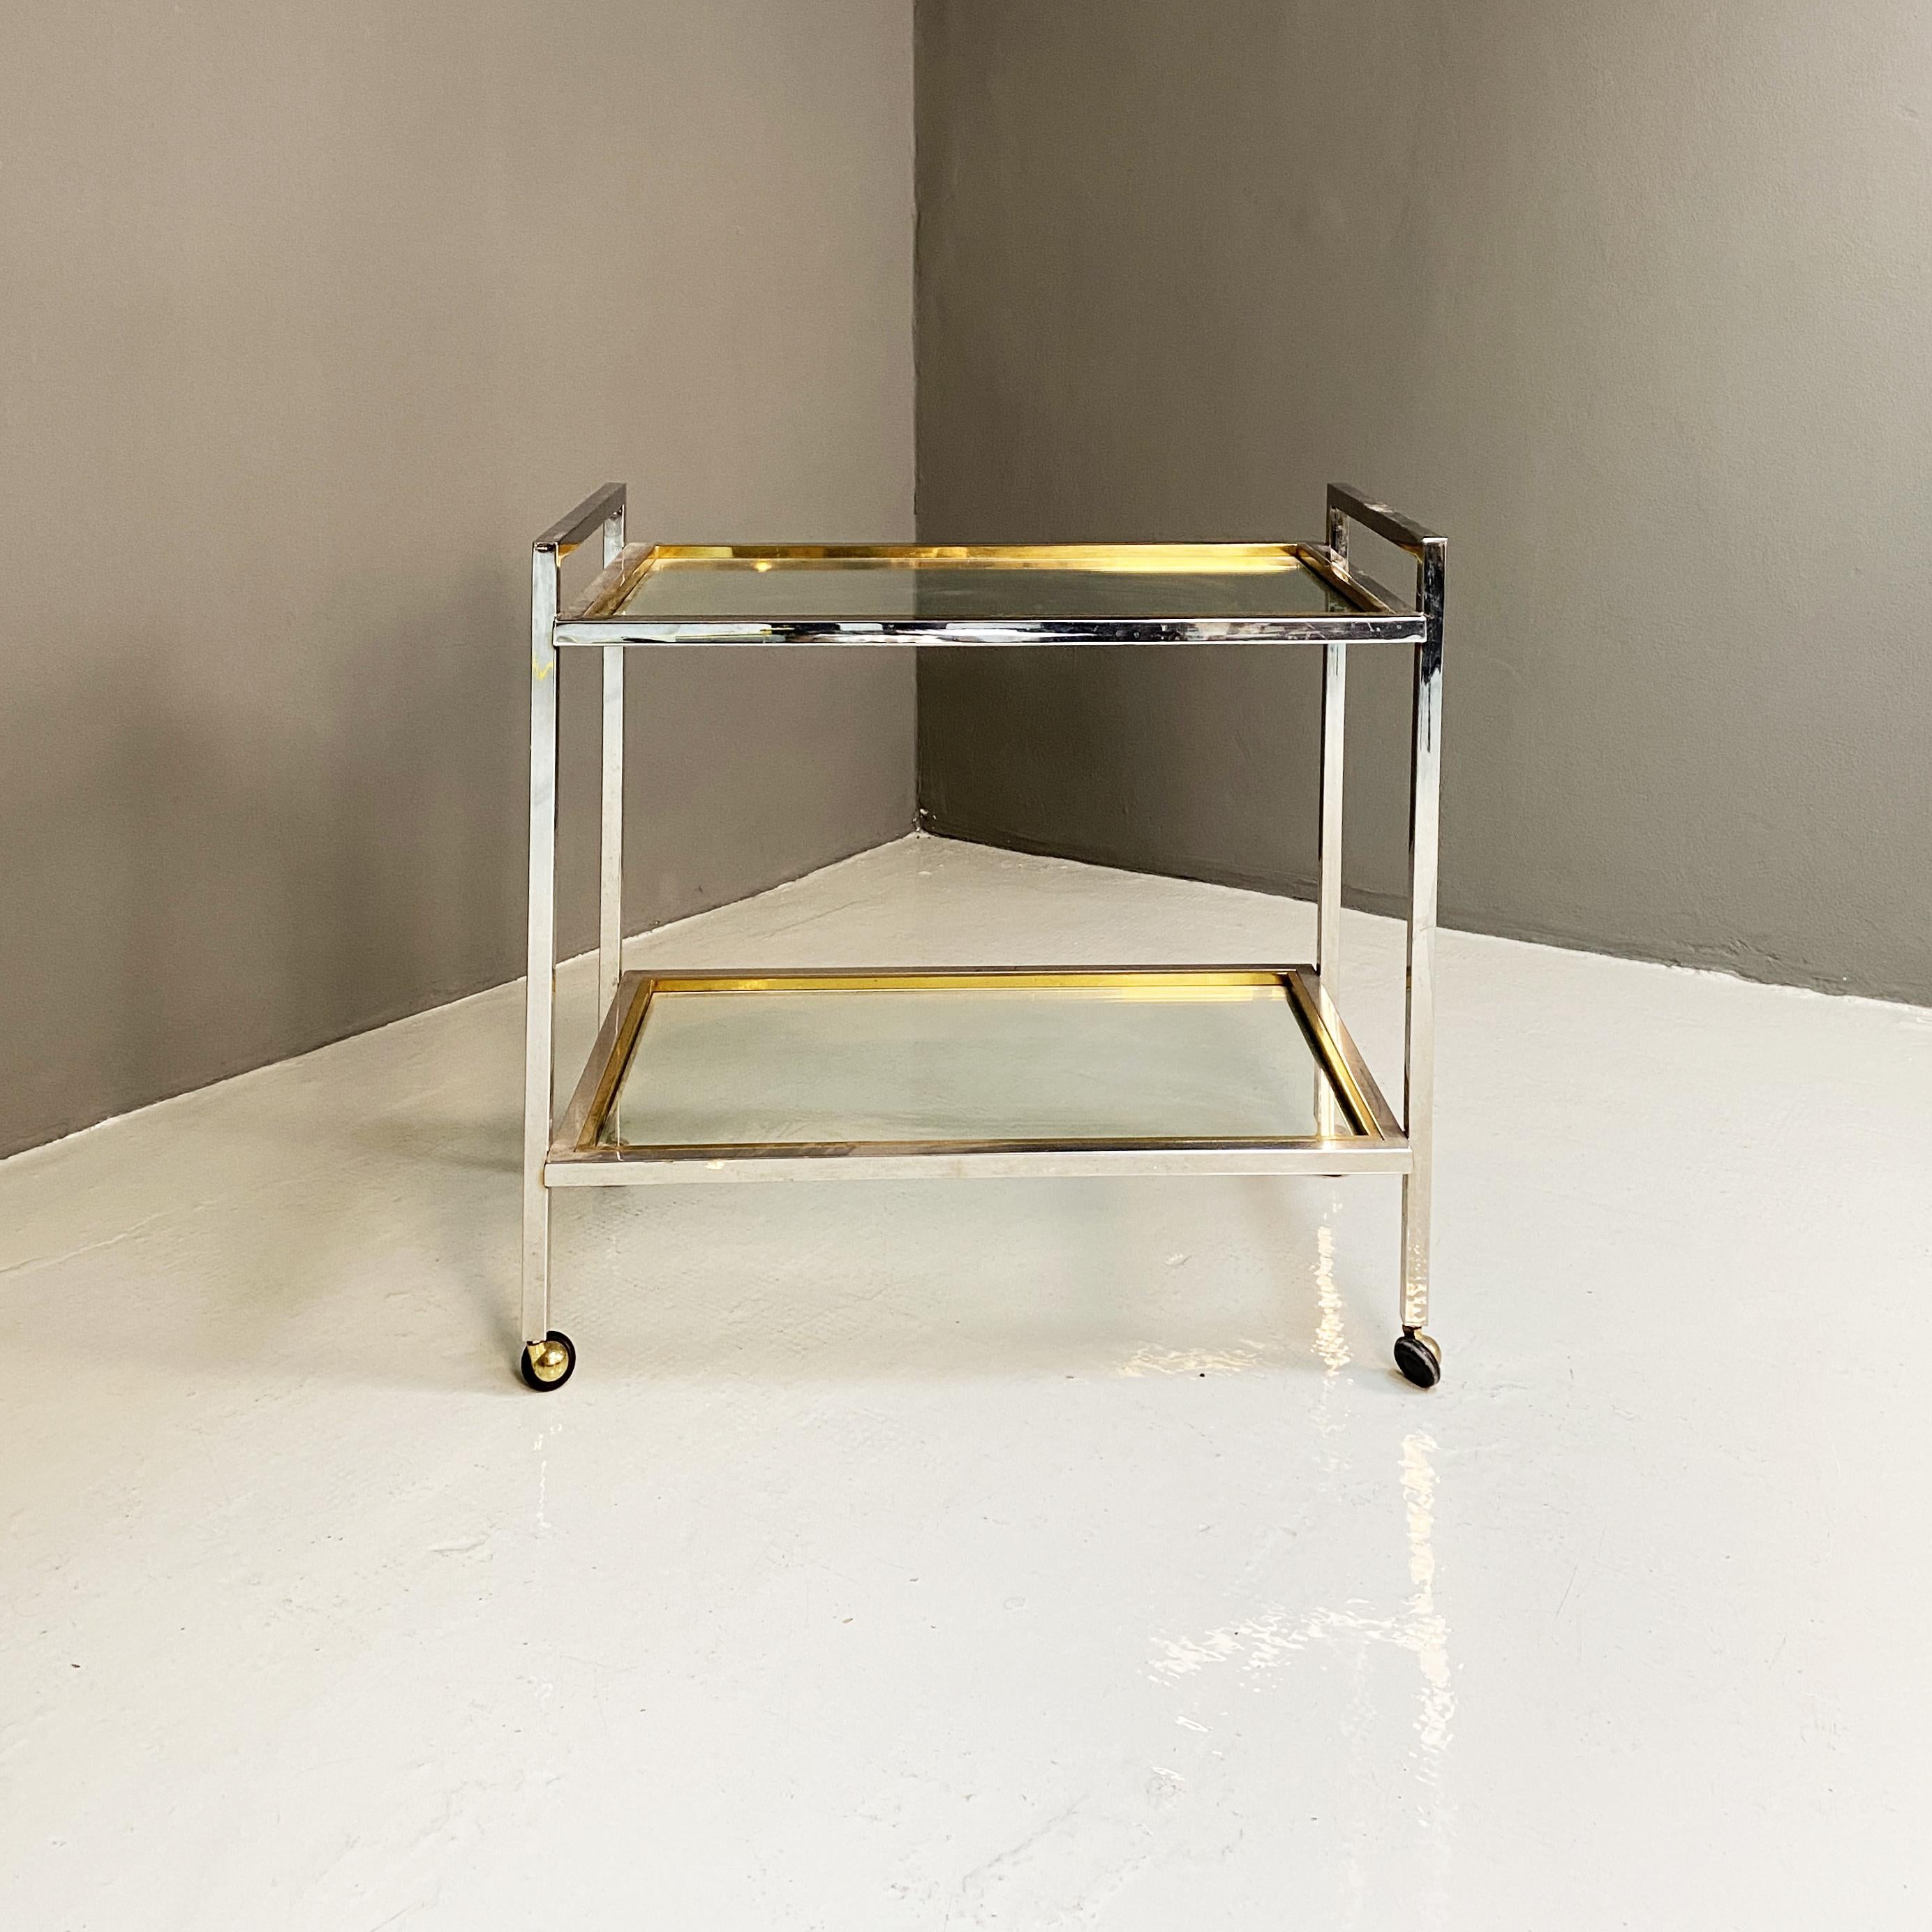 Late 20th Century Italian Mid-Century Modern Steel and Brass Cart with Two Shelves, 1970s